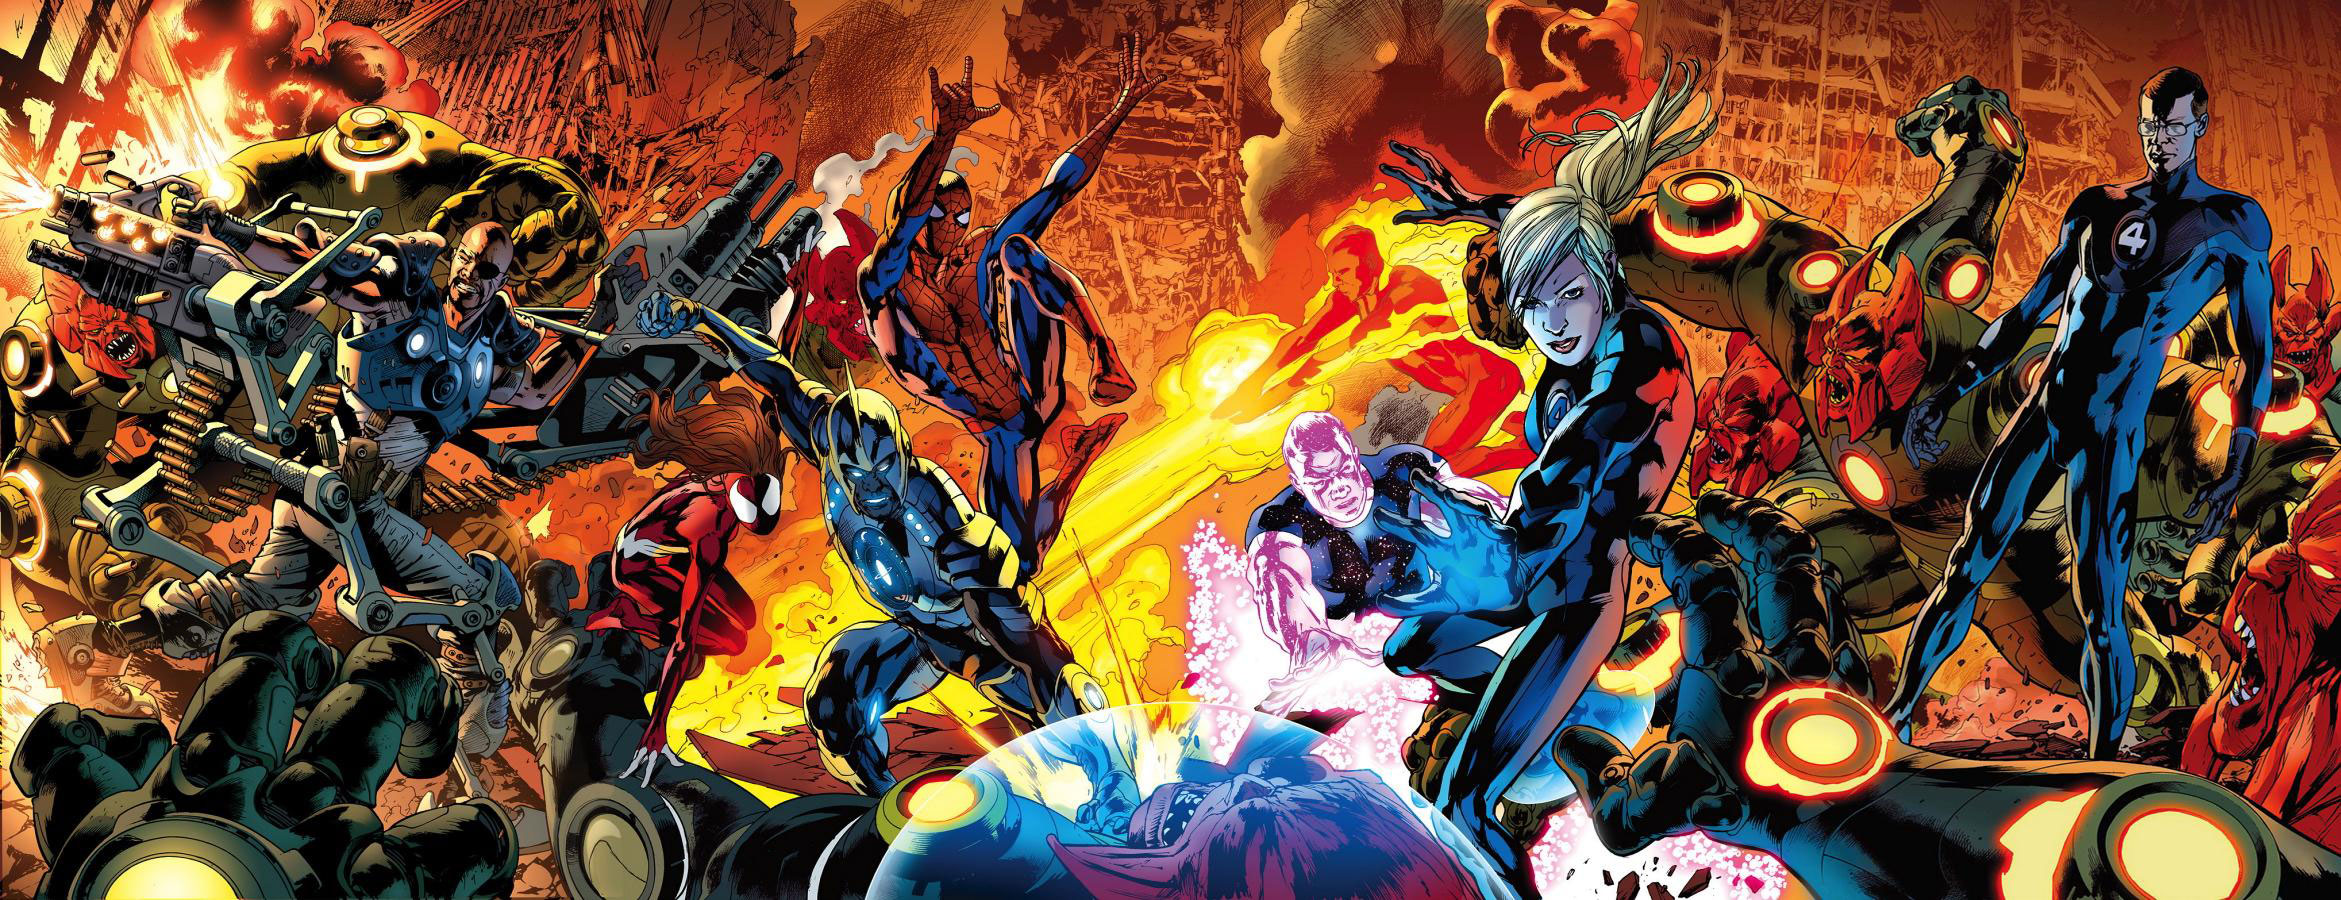 Image Wallpaper Of Fantastic Four In HD Quality Bsnscb